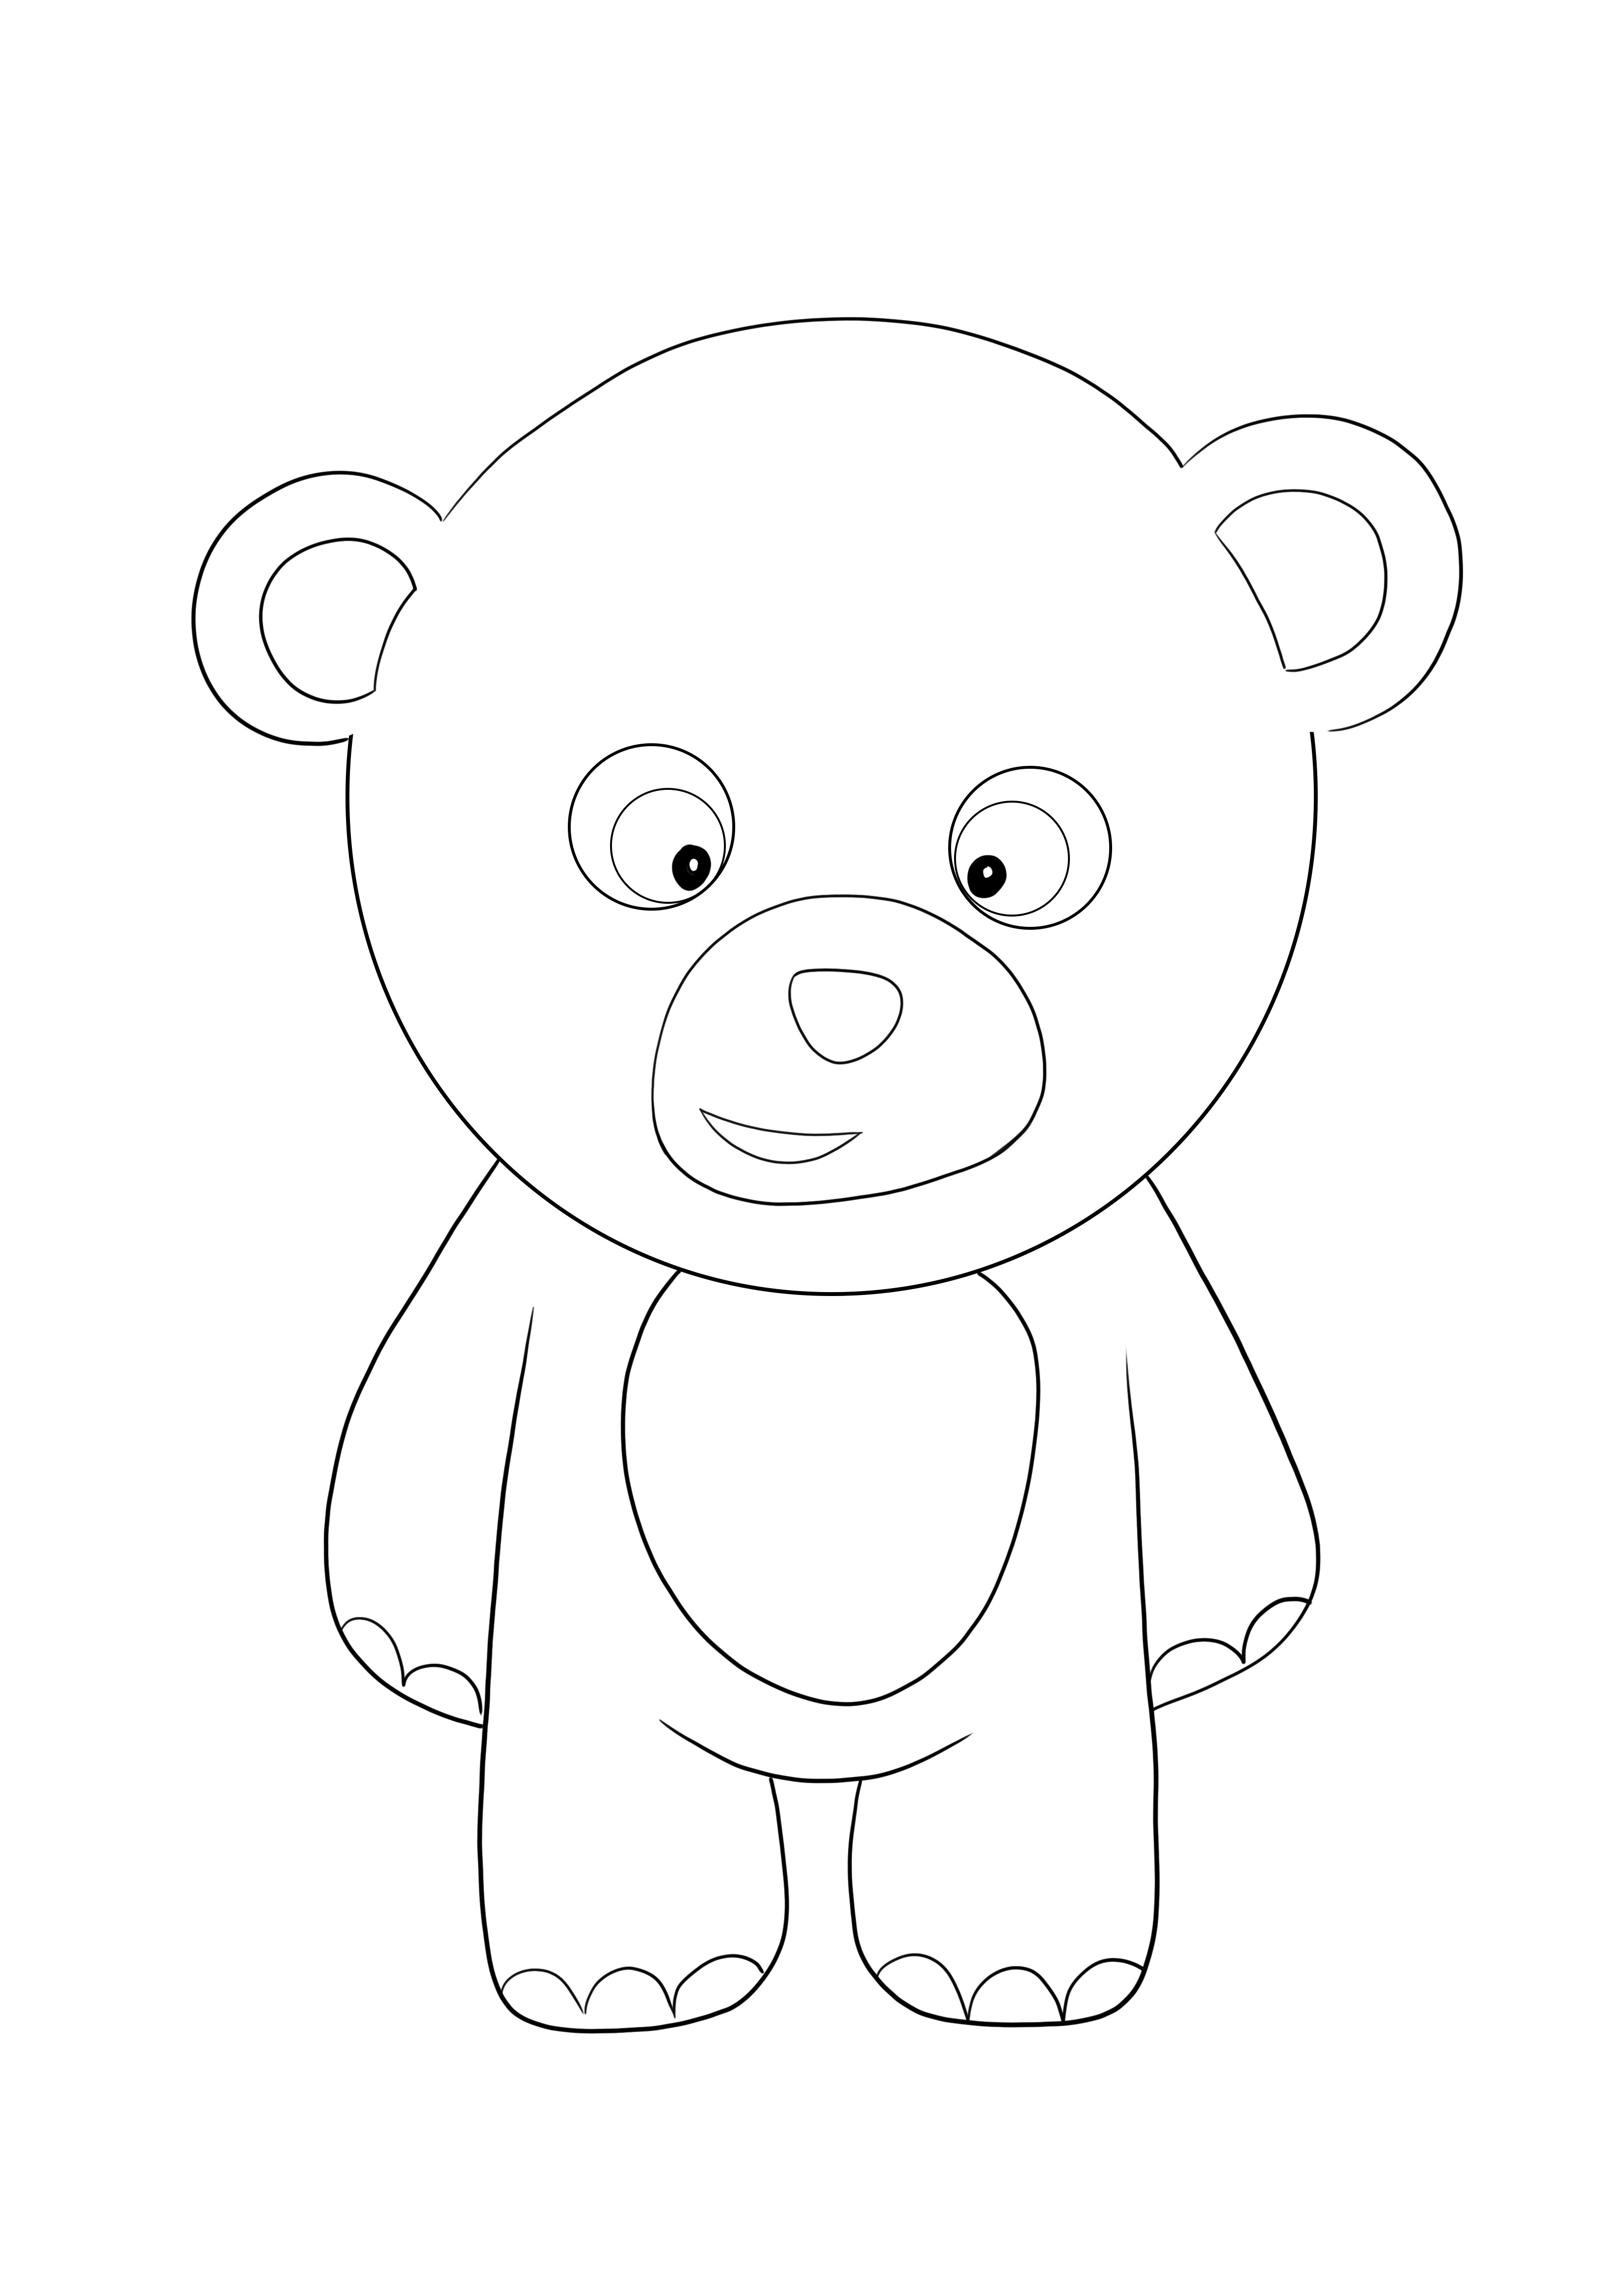 Standing Teddy Bear to download or print for free